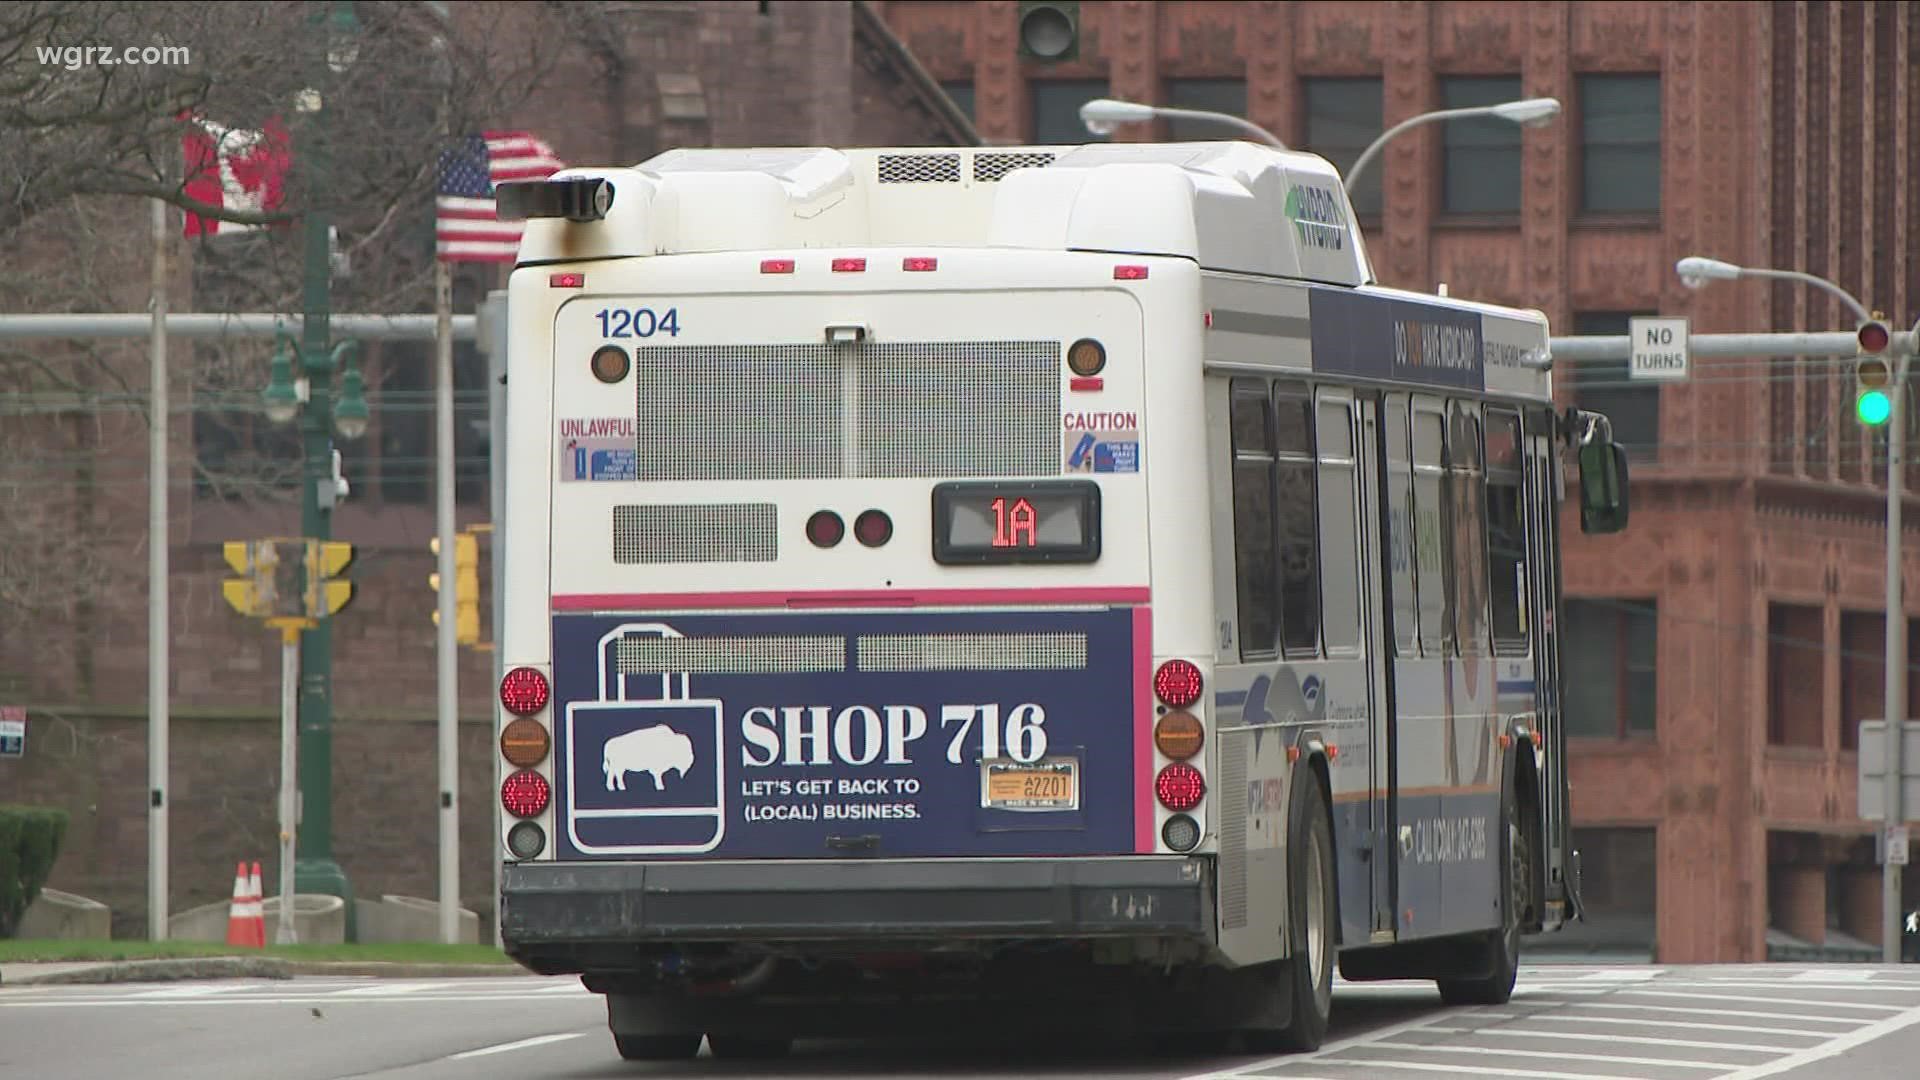 A spokesperson tells 2 On Your Side the agency us restoring all express routes that were suspended in February.